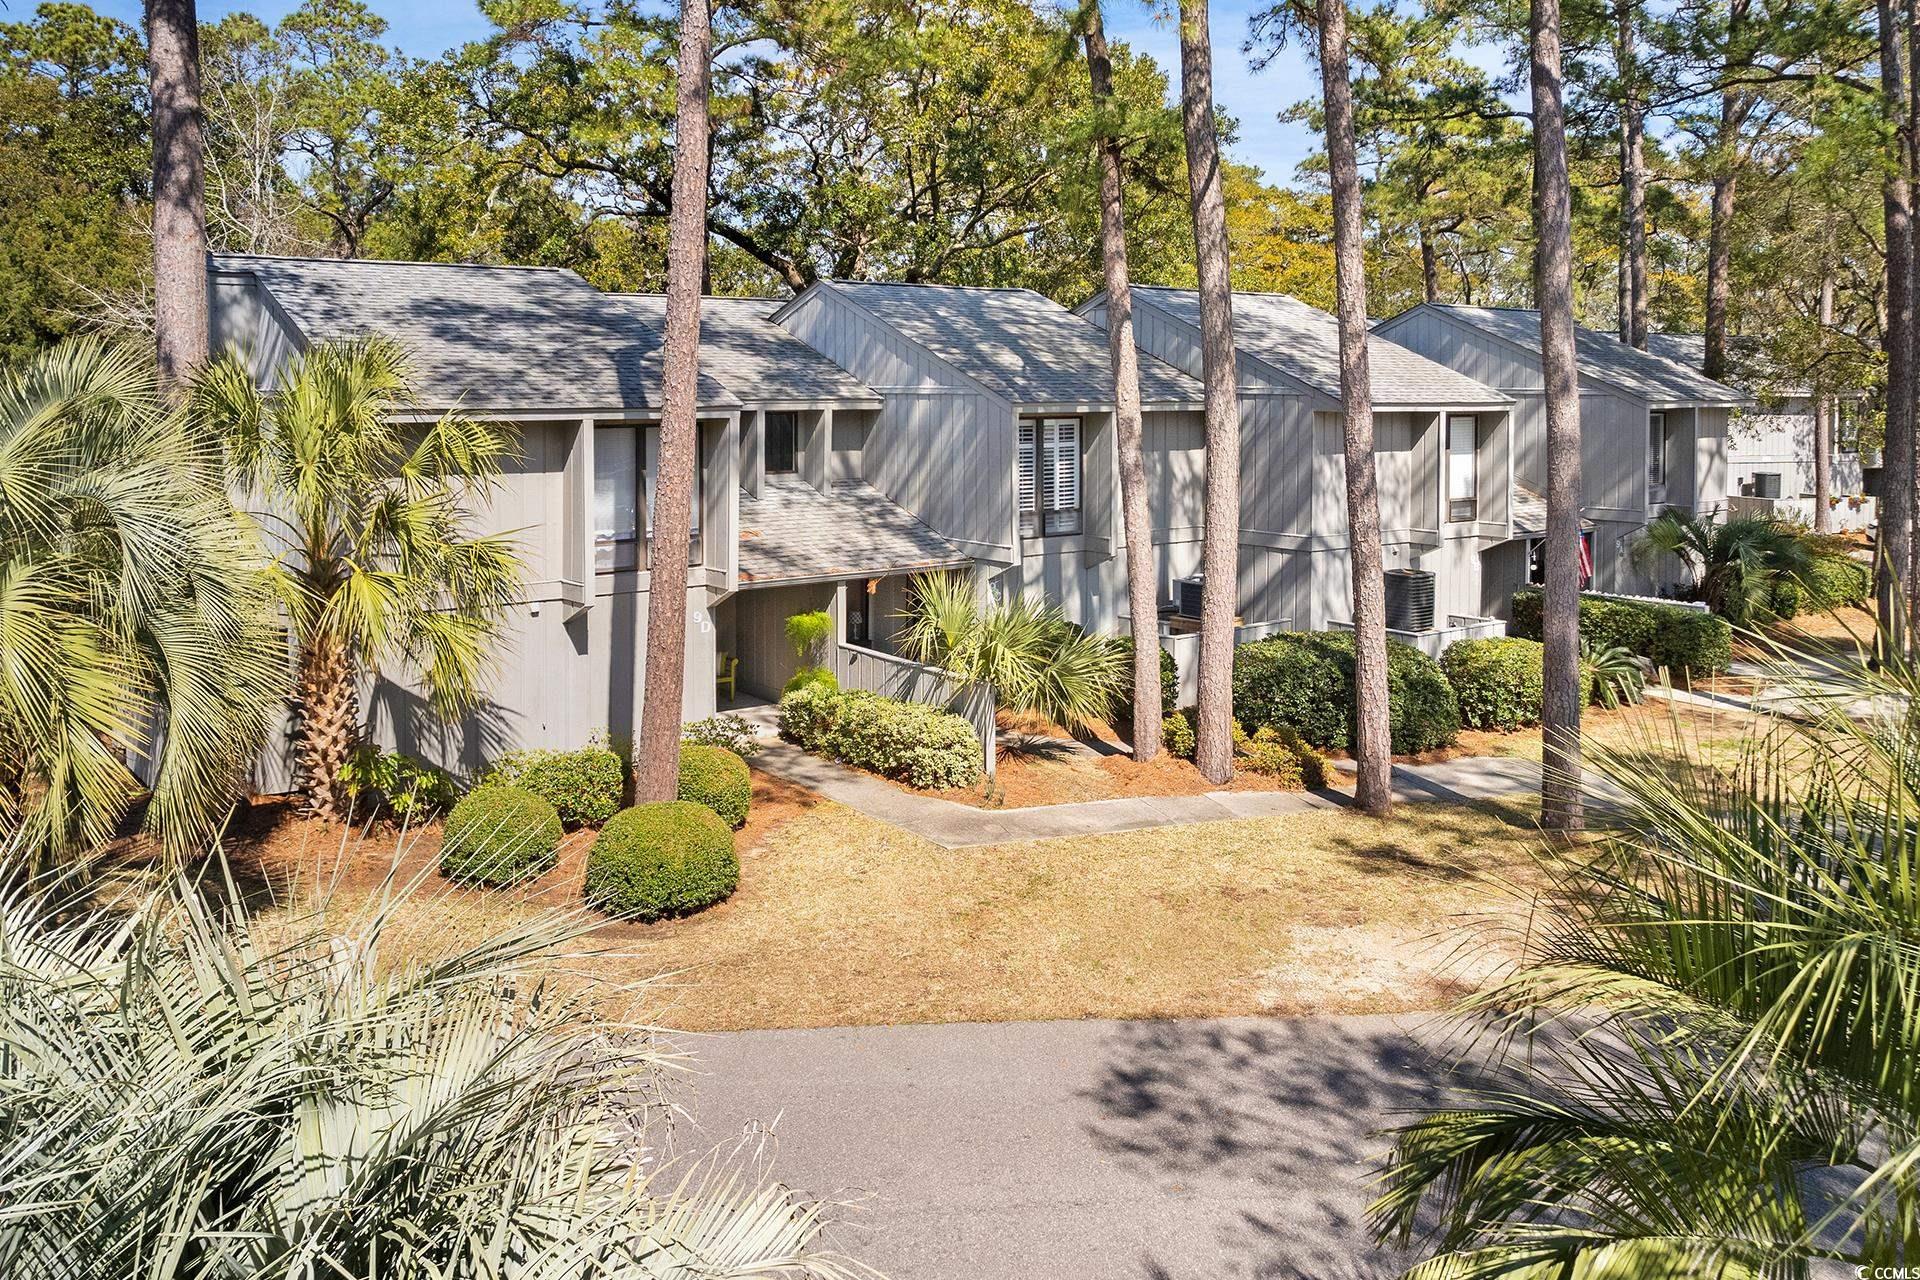 this charming end unit has been updated and boasts a delightful appeal, situated within the inviting community of salt marsh cove in pawleys island. nestled in the heart of pawleys island, this unit offers access to a host of amenities including a community pool, clubhouse, creek dock, and boat storage. enjoy the convenience of being just moments away from pristine beaches, renowned golf courses, quaint boutiques, and enticing dining options. featuring three bedrooms, this unit showcases a brand-new kitchen and two bathrooms upstairs, leaving the downstairs perfect for entertaining guests. a spacious laundry room adds functionality, enhanced by eye-catching wallpaper that imbues the unit with its own unique character. outdoor living is embraced with tiled front and back porches, providing ample space for relaxation. abundant storage ensures ample room for all your belongings. welcome to your new home in the charming town of pawleys island, sc.